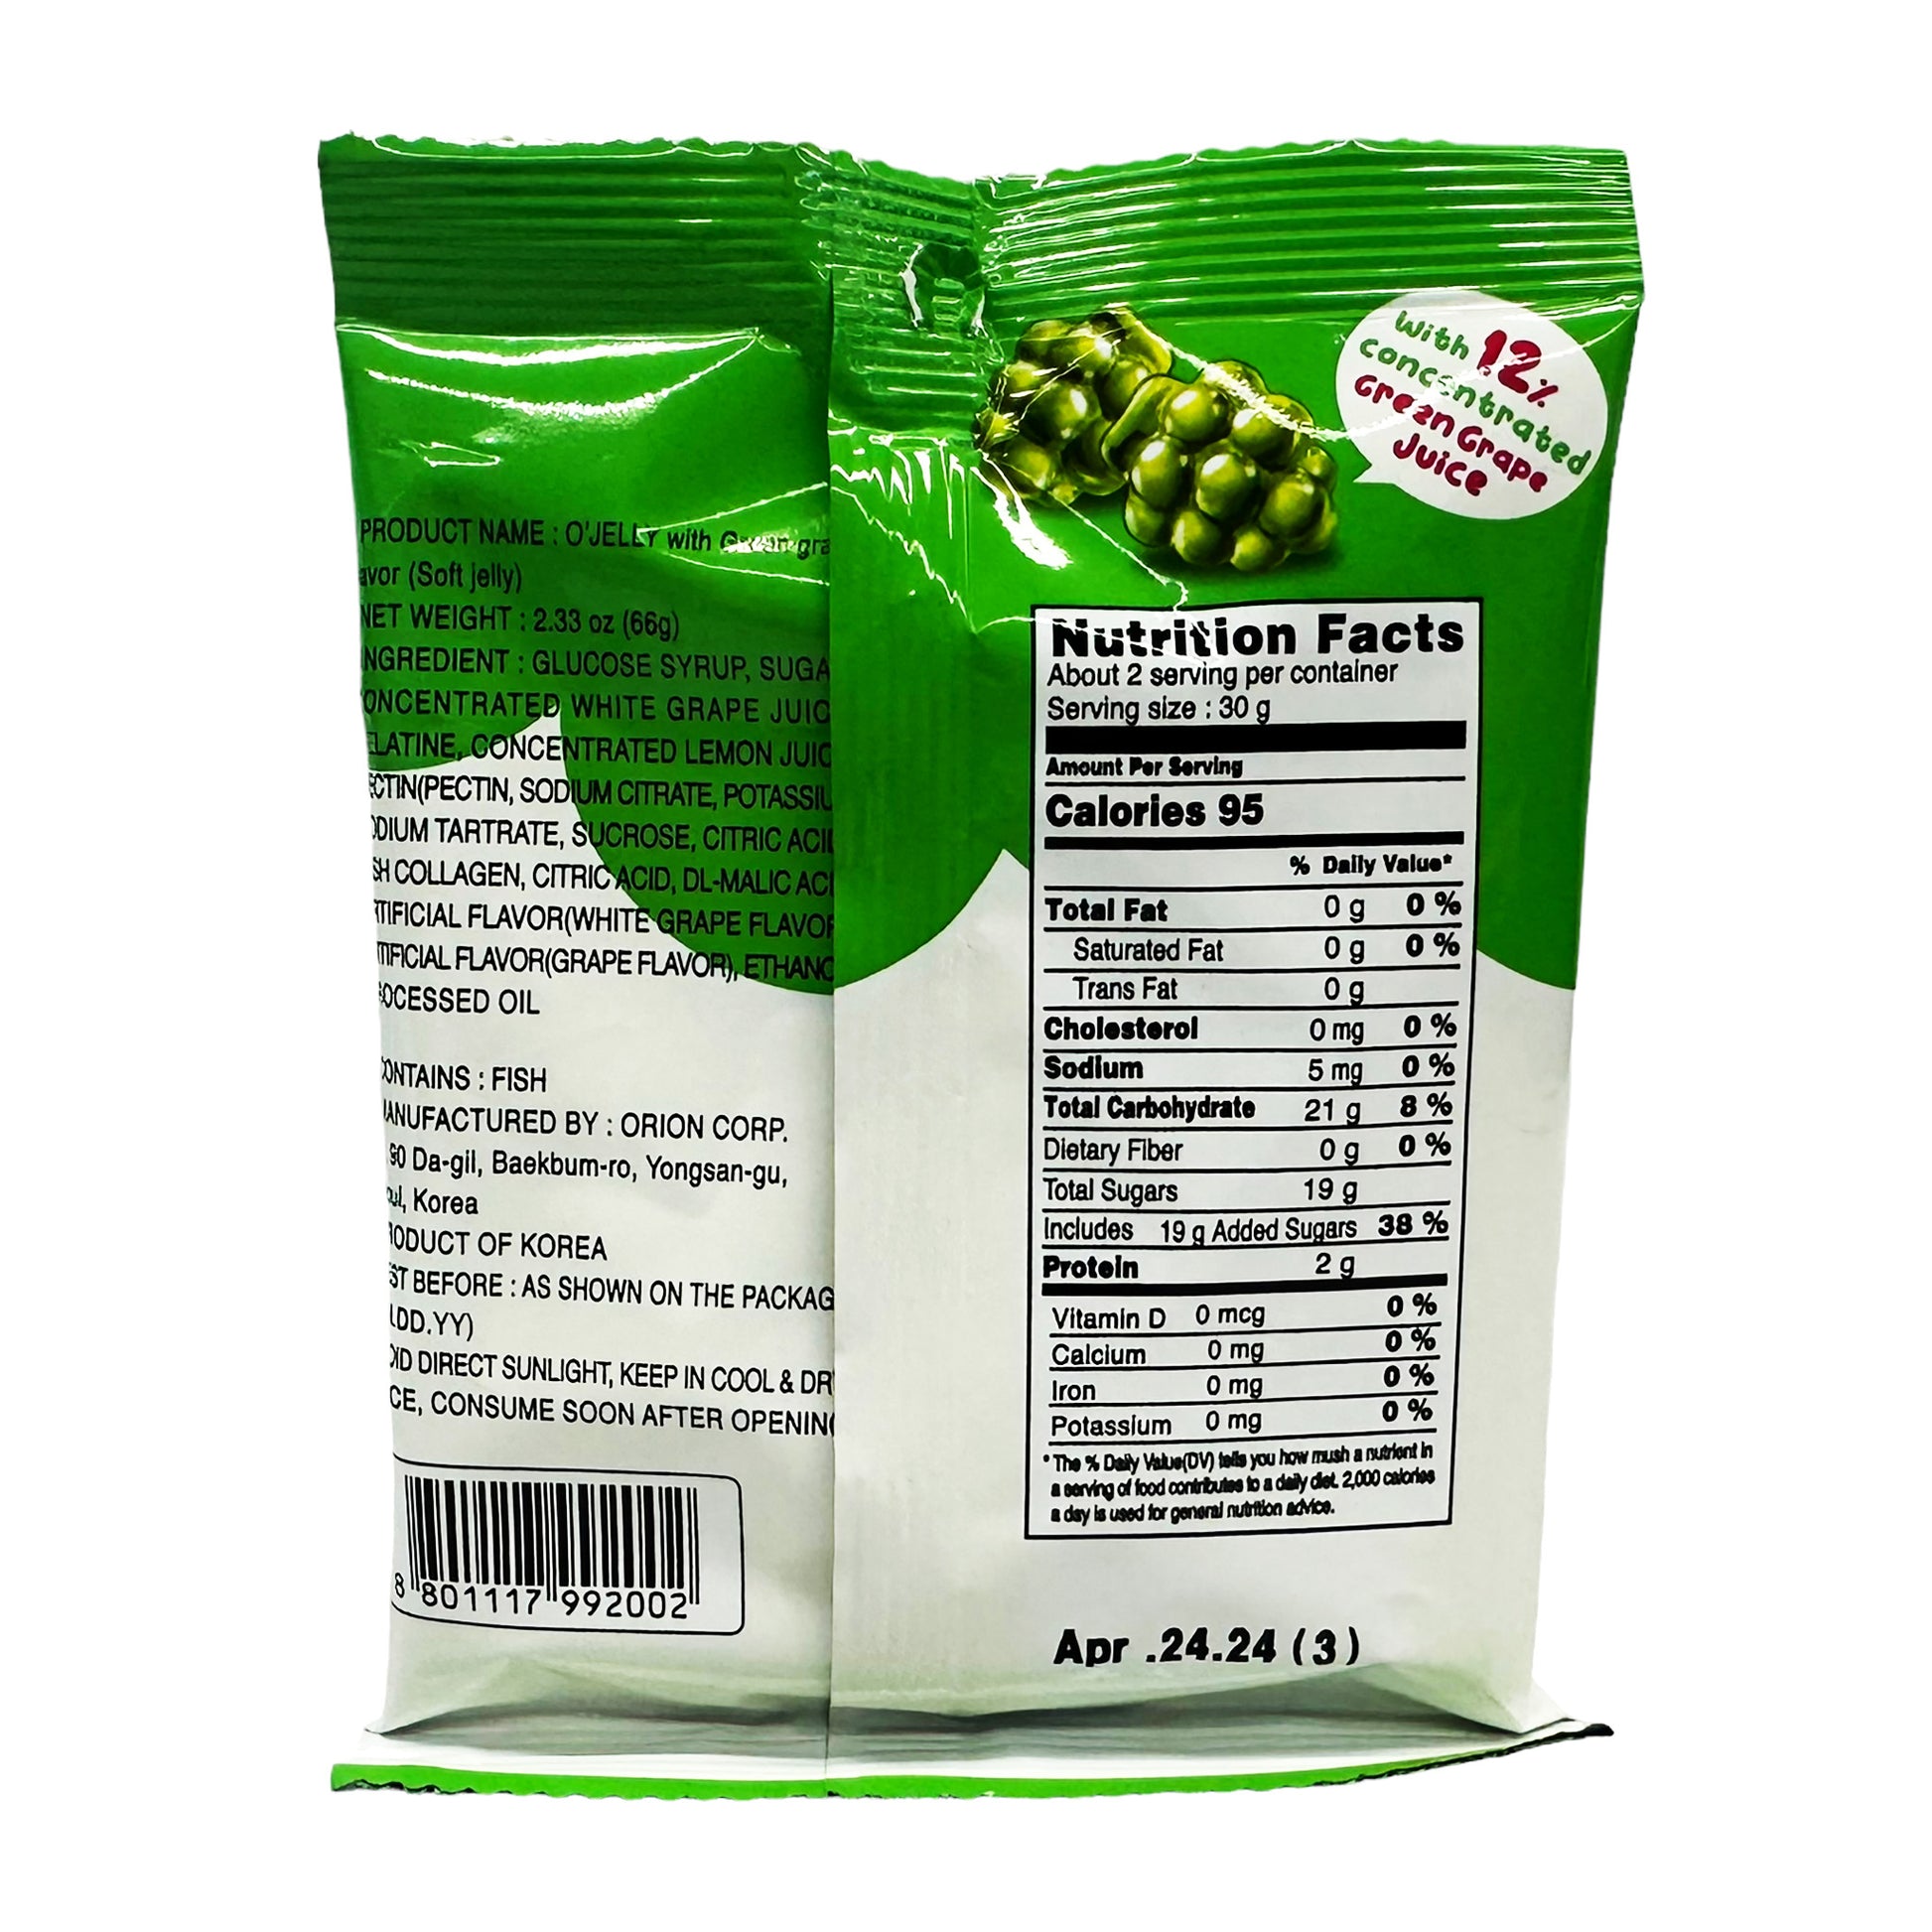 Back graphic image of Orion O'Jelly Gummy Candy - Green Grape Flavor 2.33oz (66g)